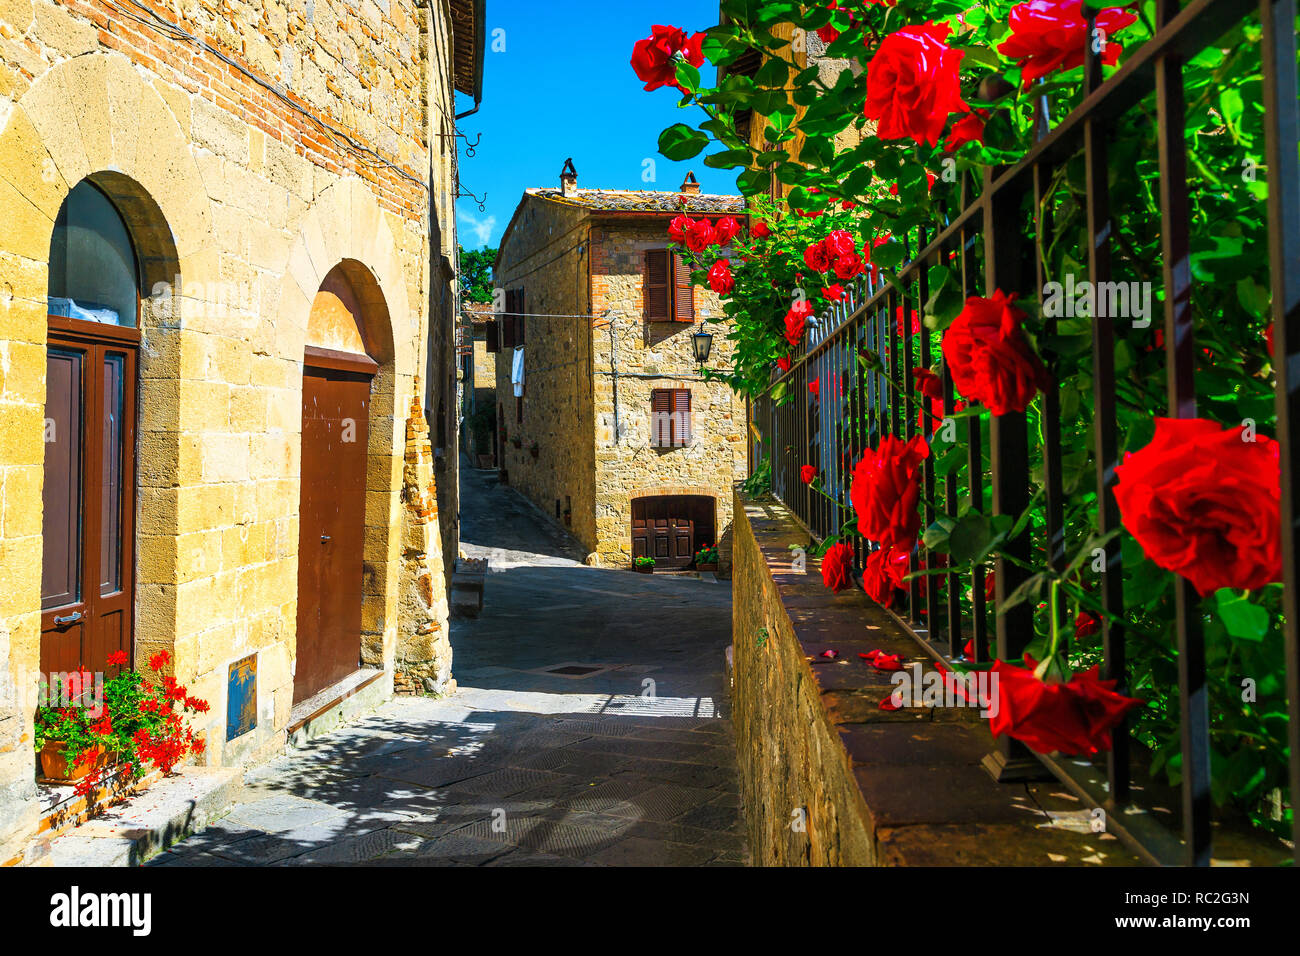 Wonderful narrow ornamental street with flowered garden. Beautiful entrance and old paved street view decorated garden with colorful red roses in Mont Stock Photo